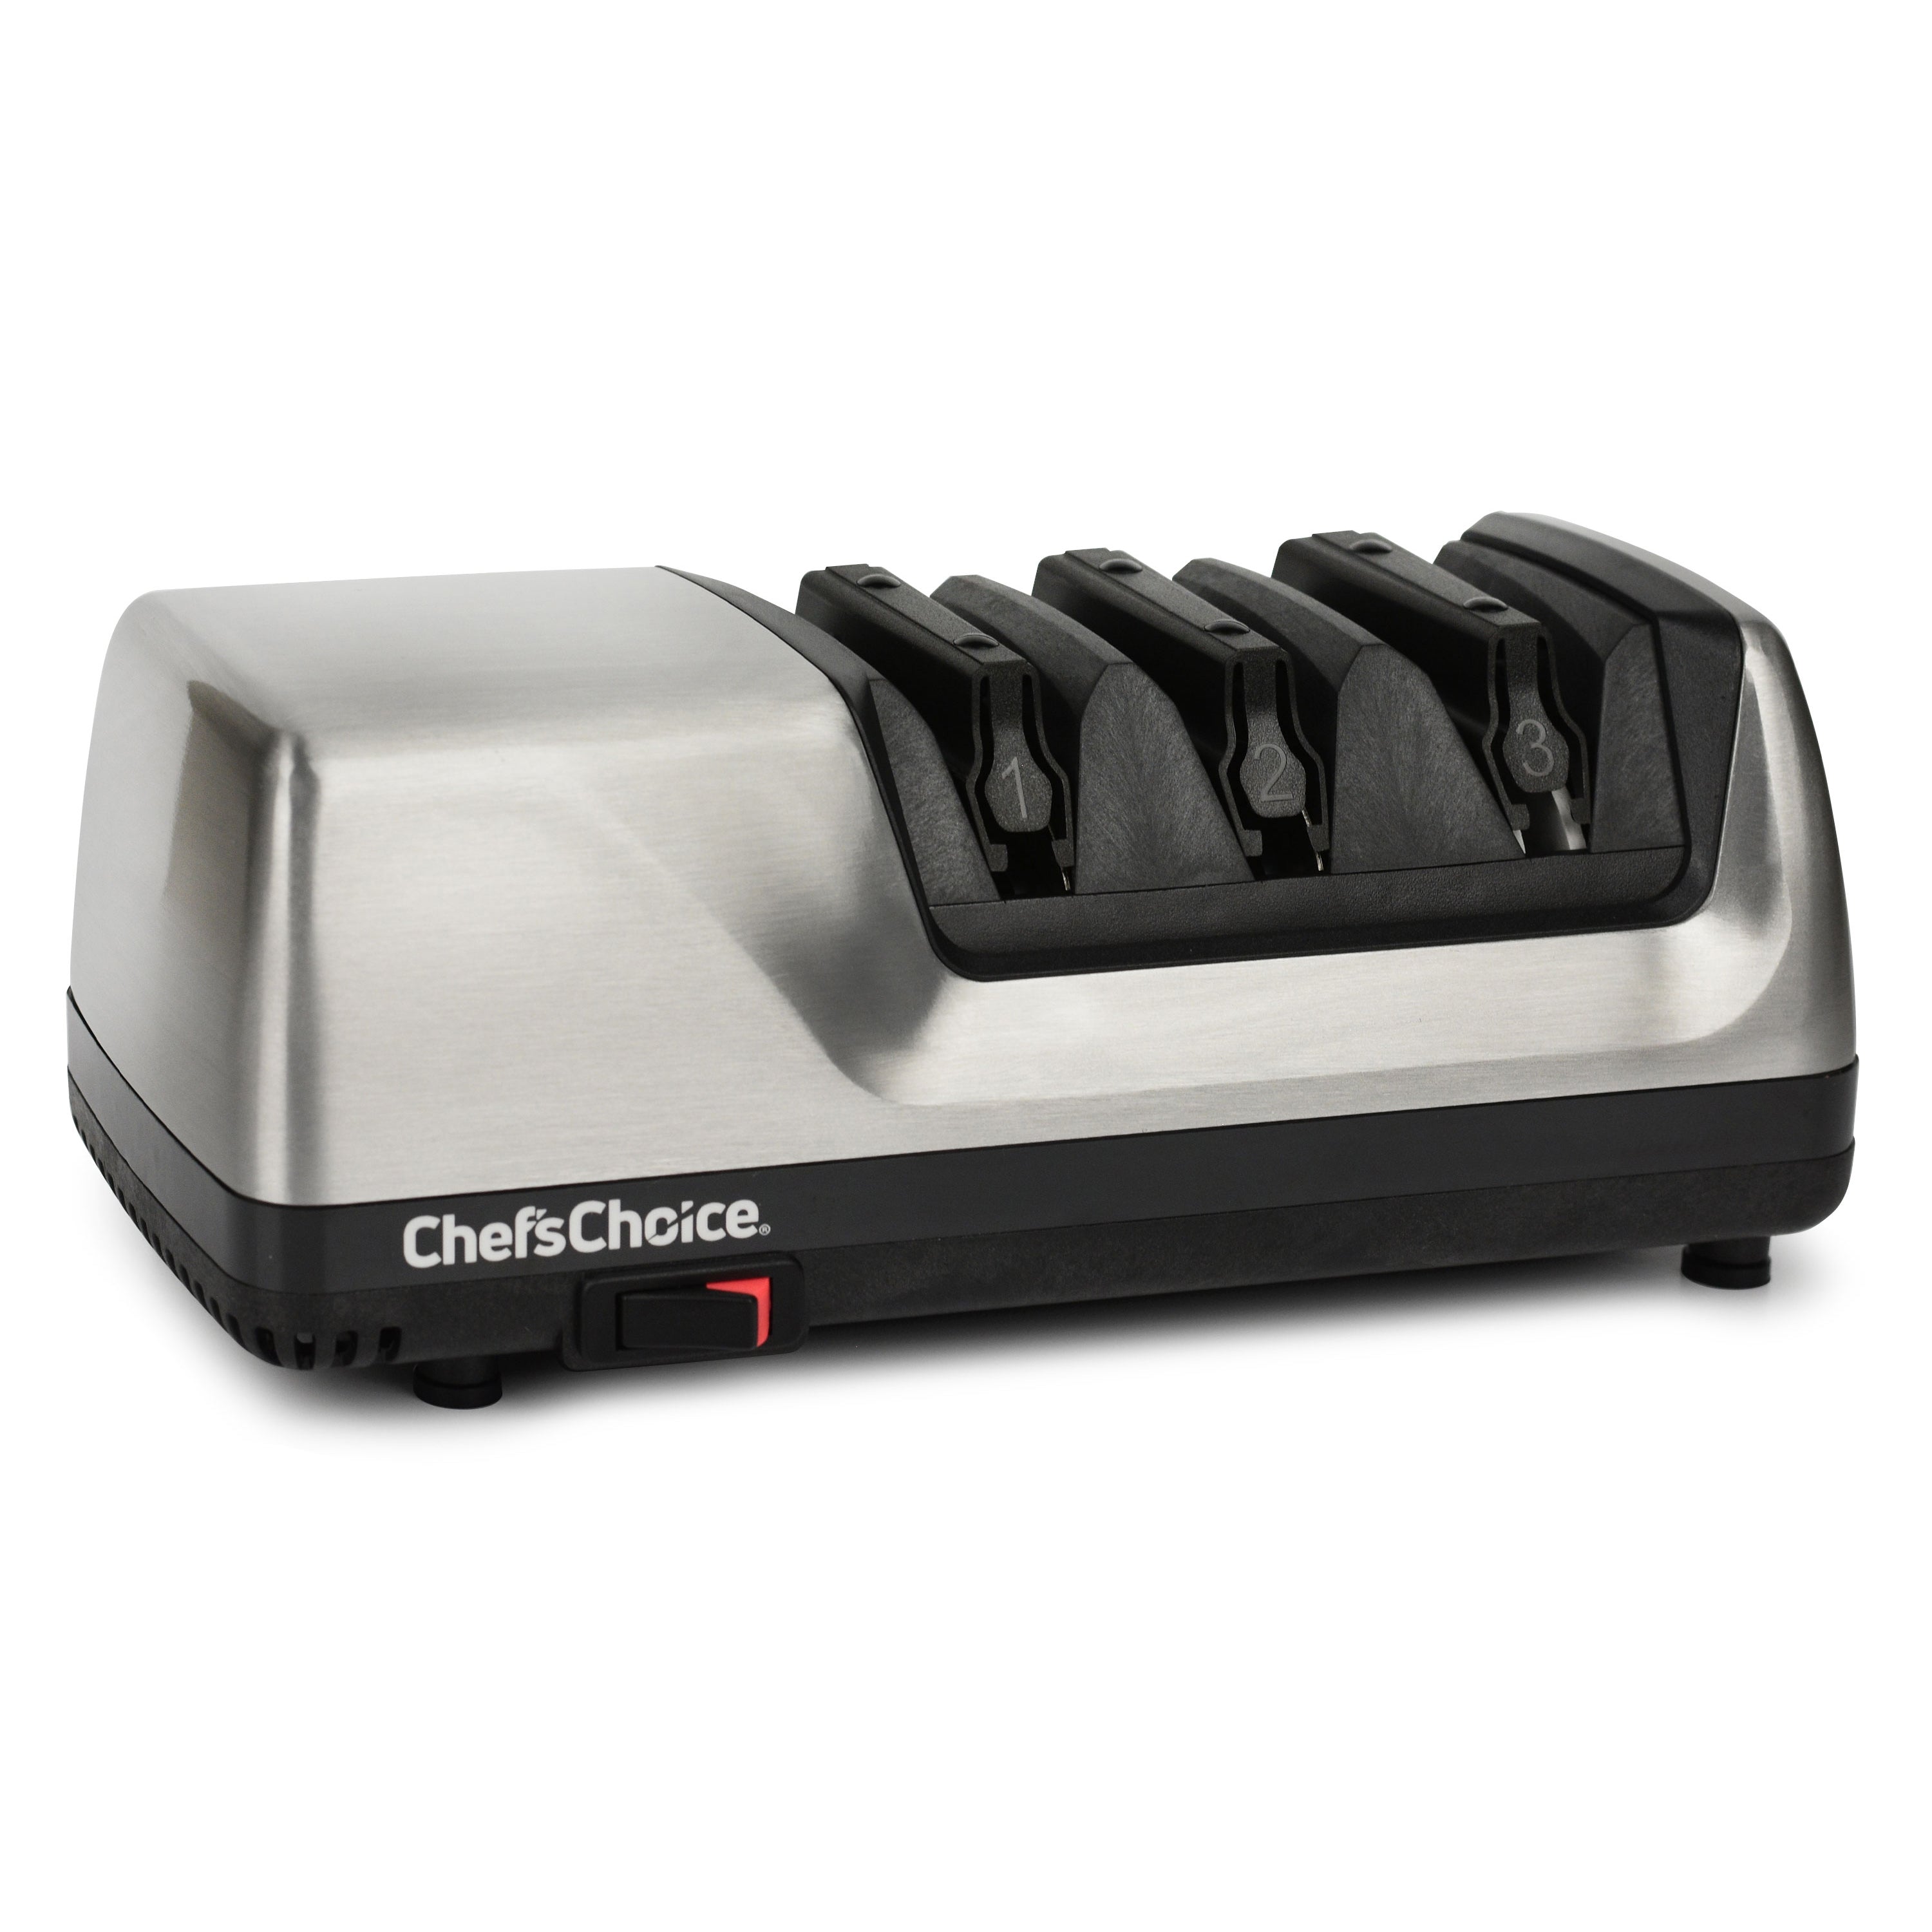  Chef'sChoice 15XV EdgeSelect Professional Electric